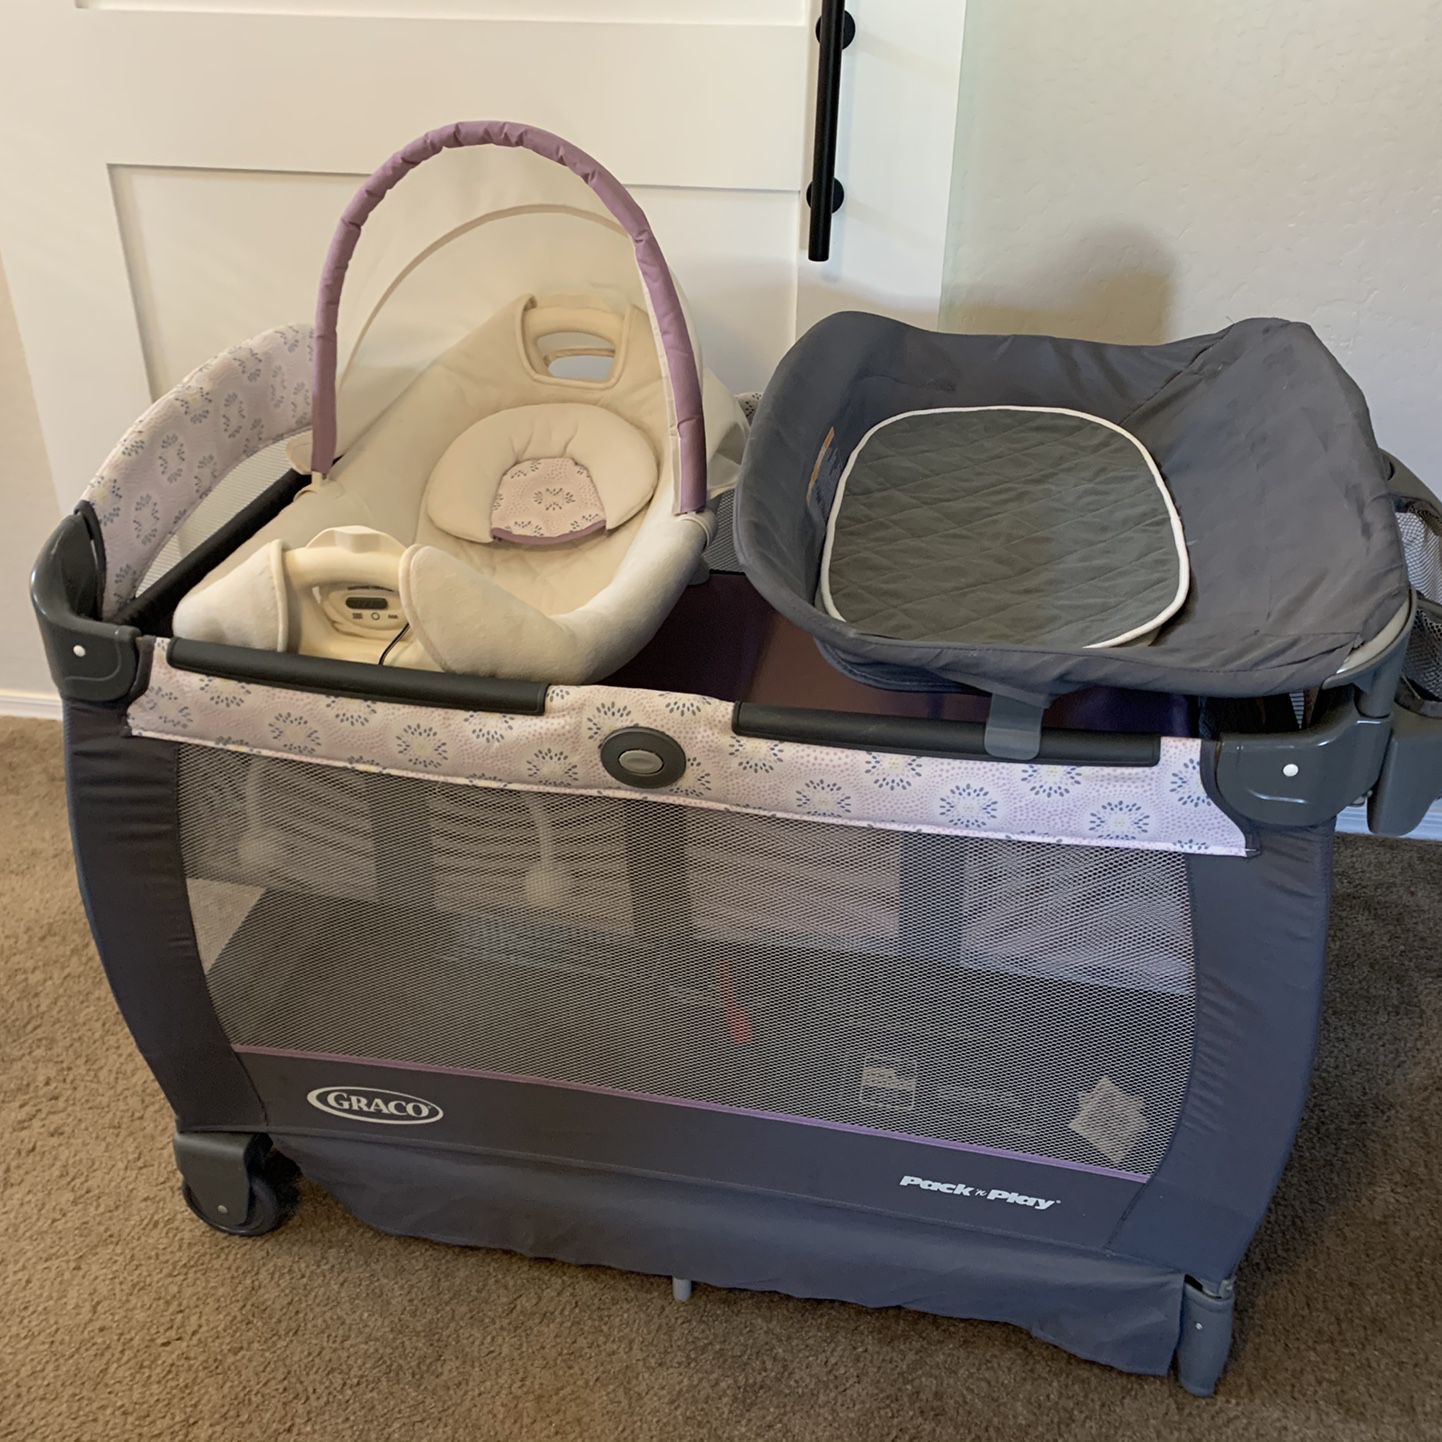 Graco Pack And Play suite And Play yard